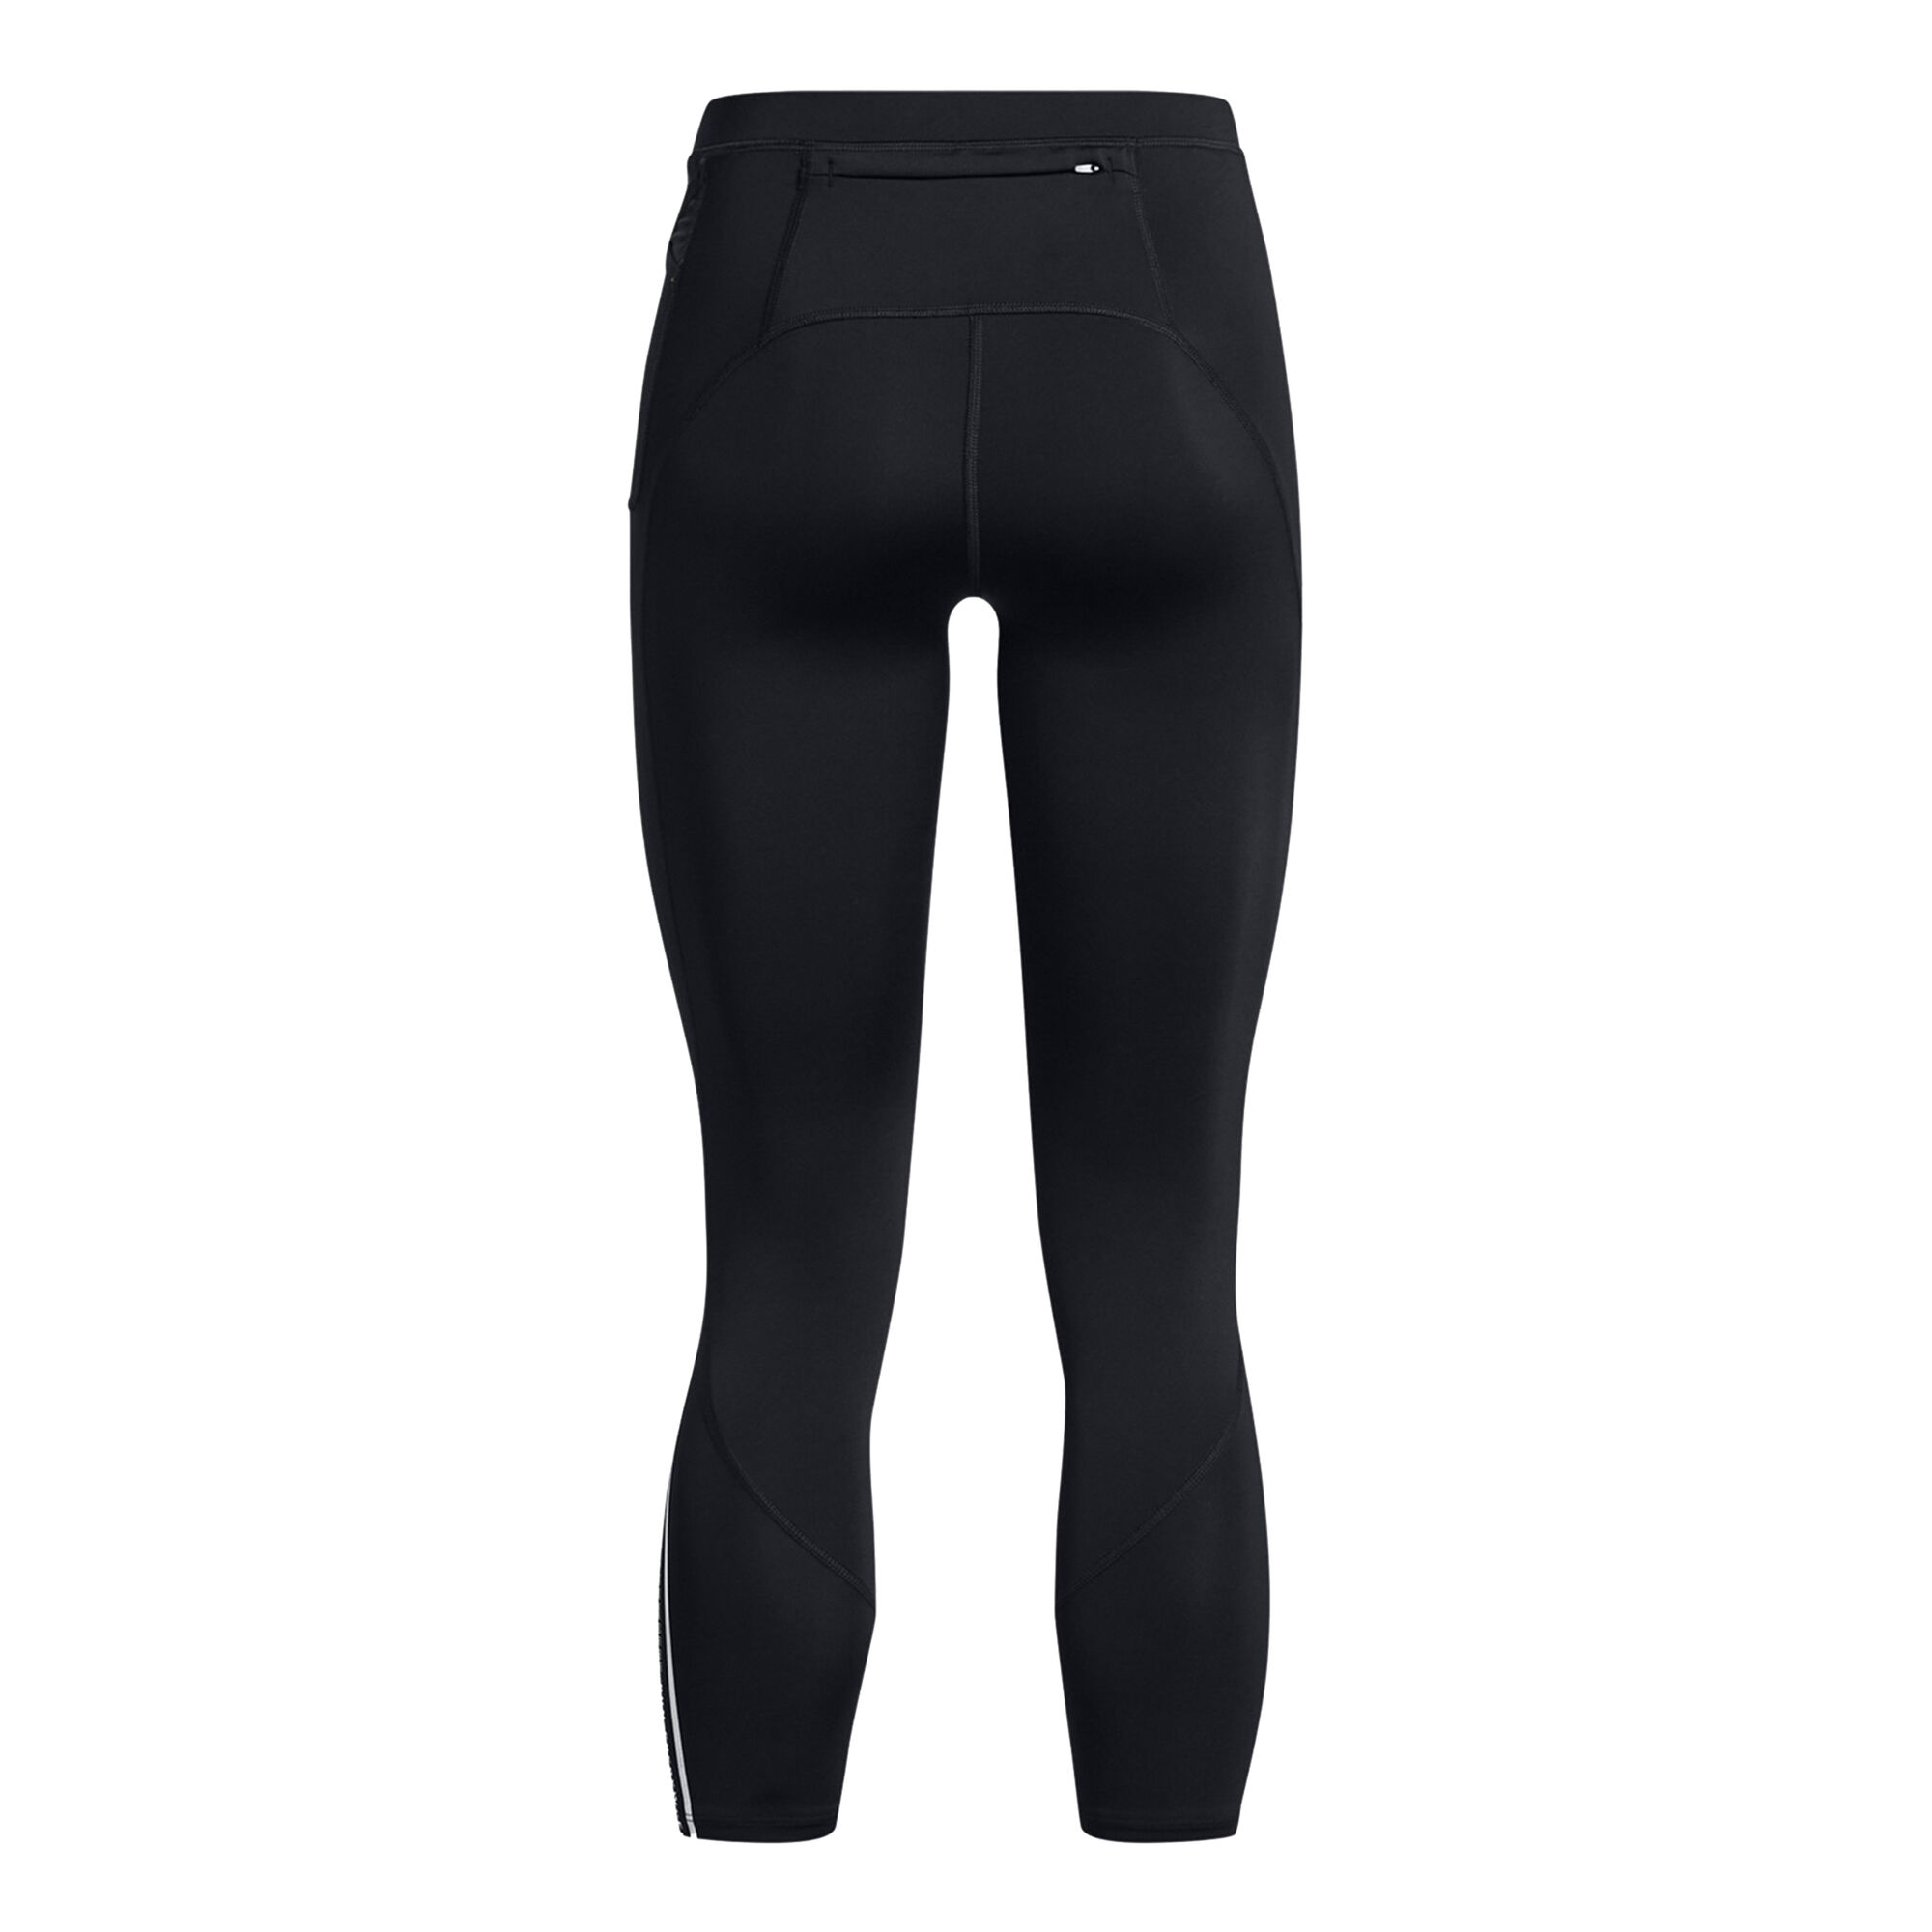 Under Armour High Rise Black Leggings Size XS - $25 (58% Off Retail) - From  Karissa